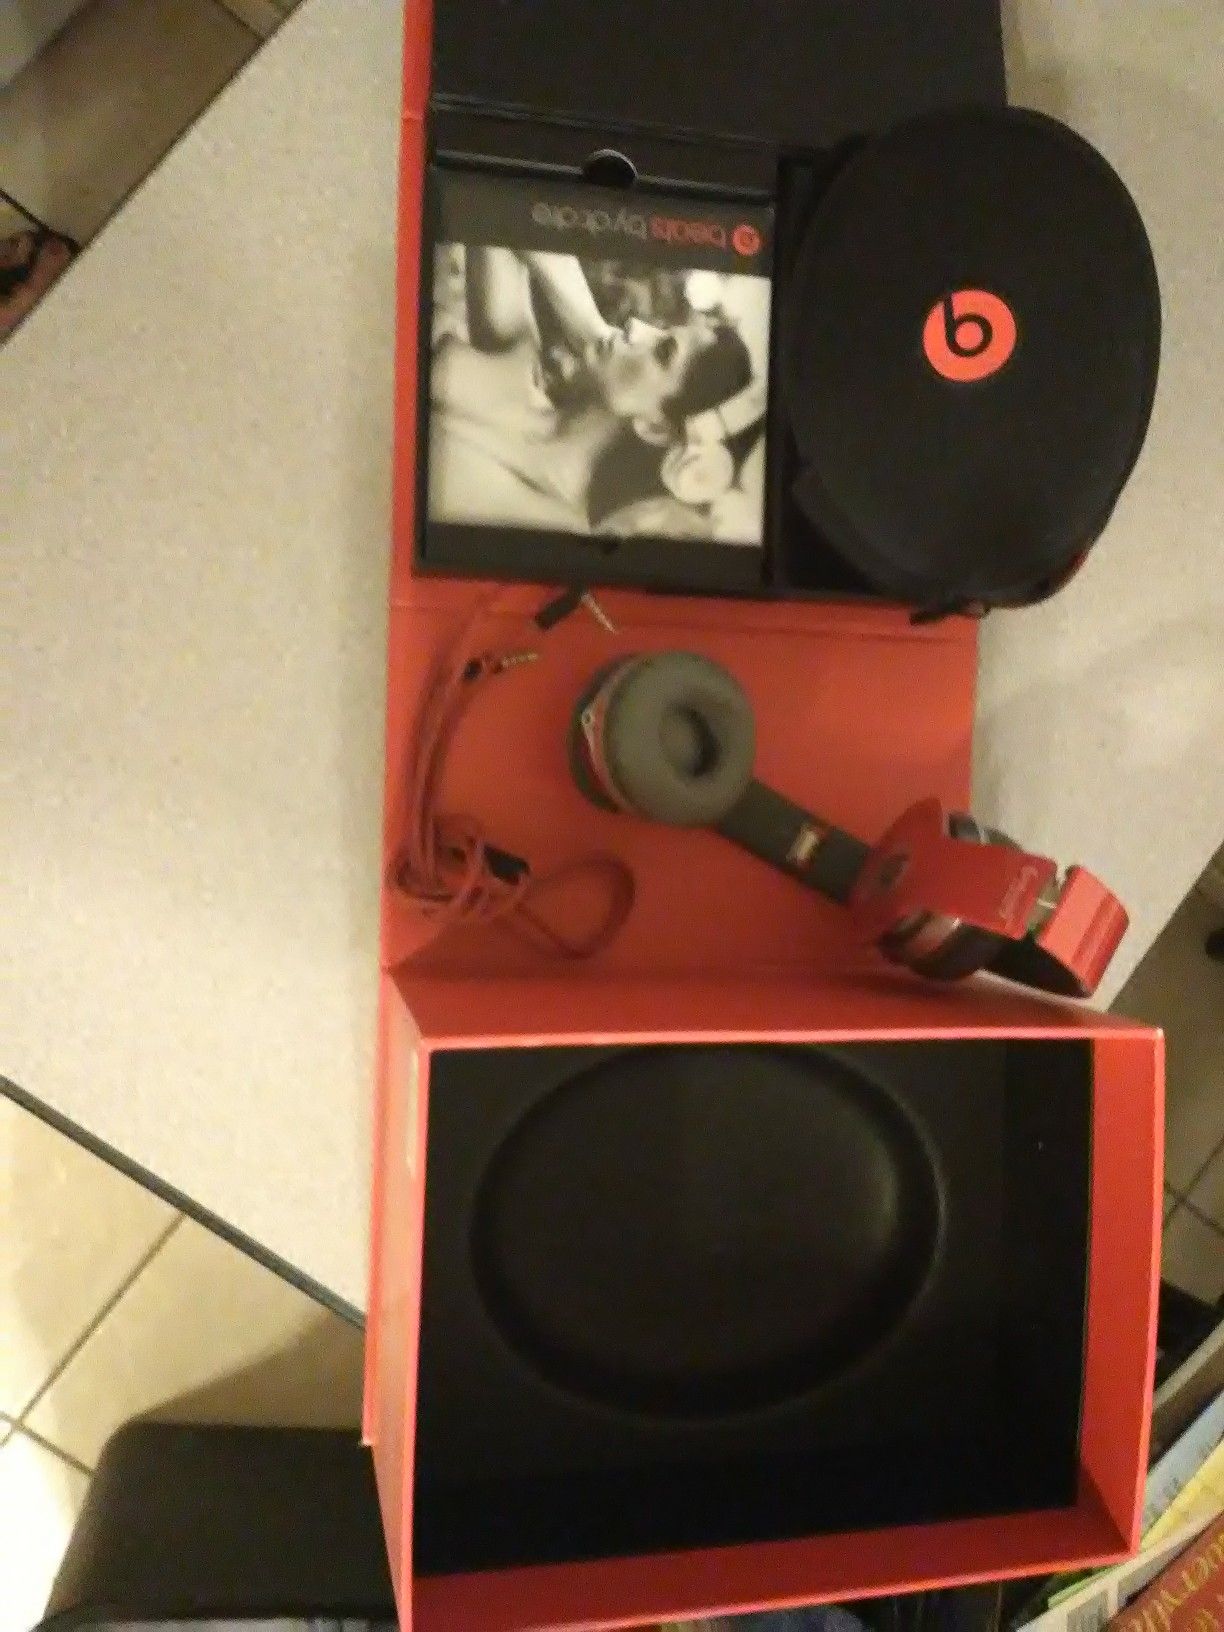 Dr. Dre beats headphones red solo special edition